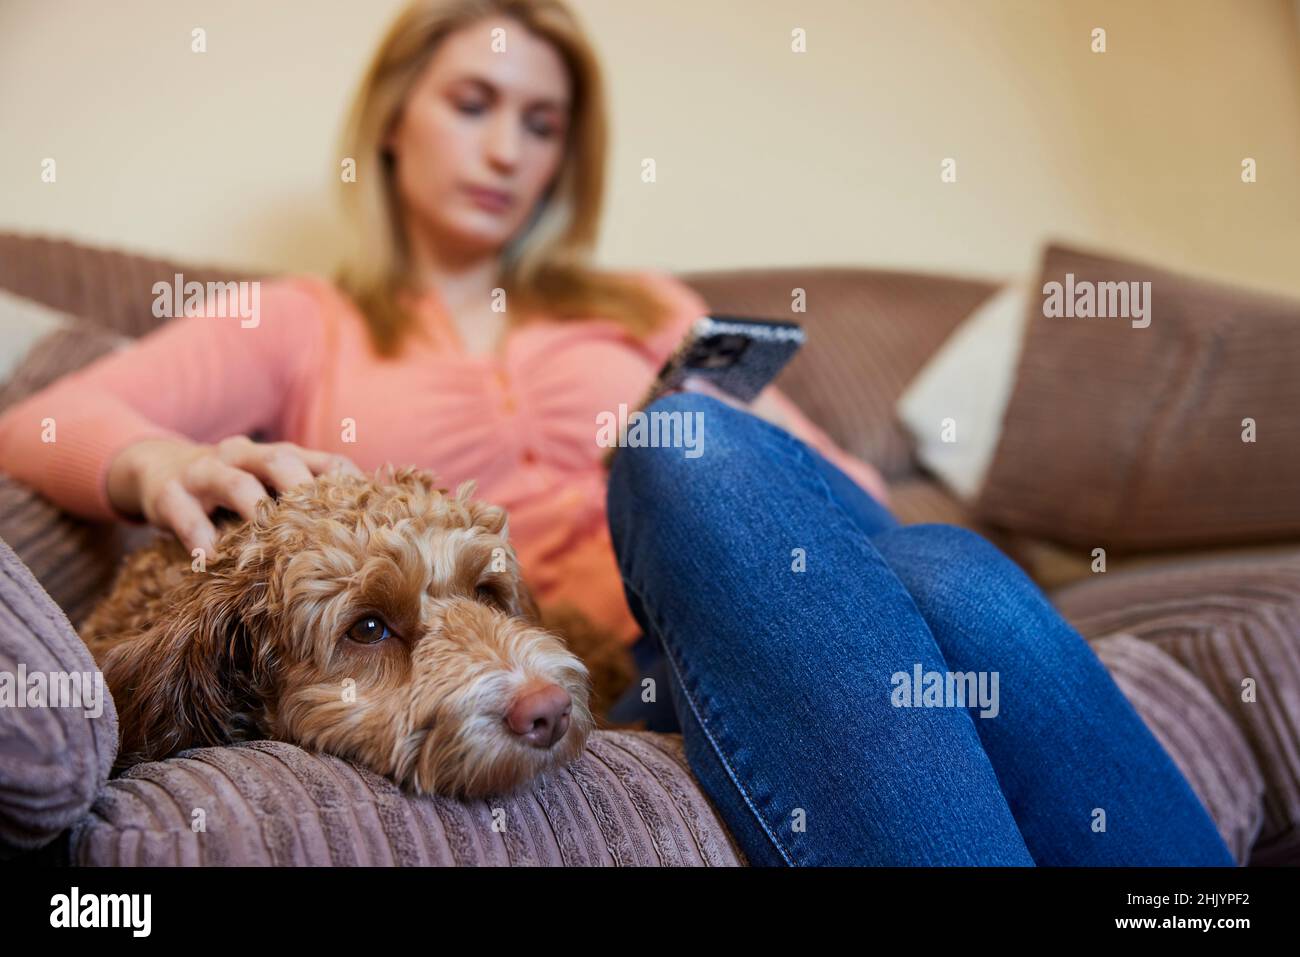 Woman With Pet Cockapoo Dog Relaxing On Sofa Checking Mobile Phone At Home Stock Photo